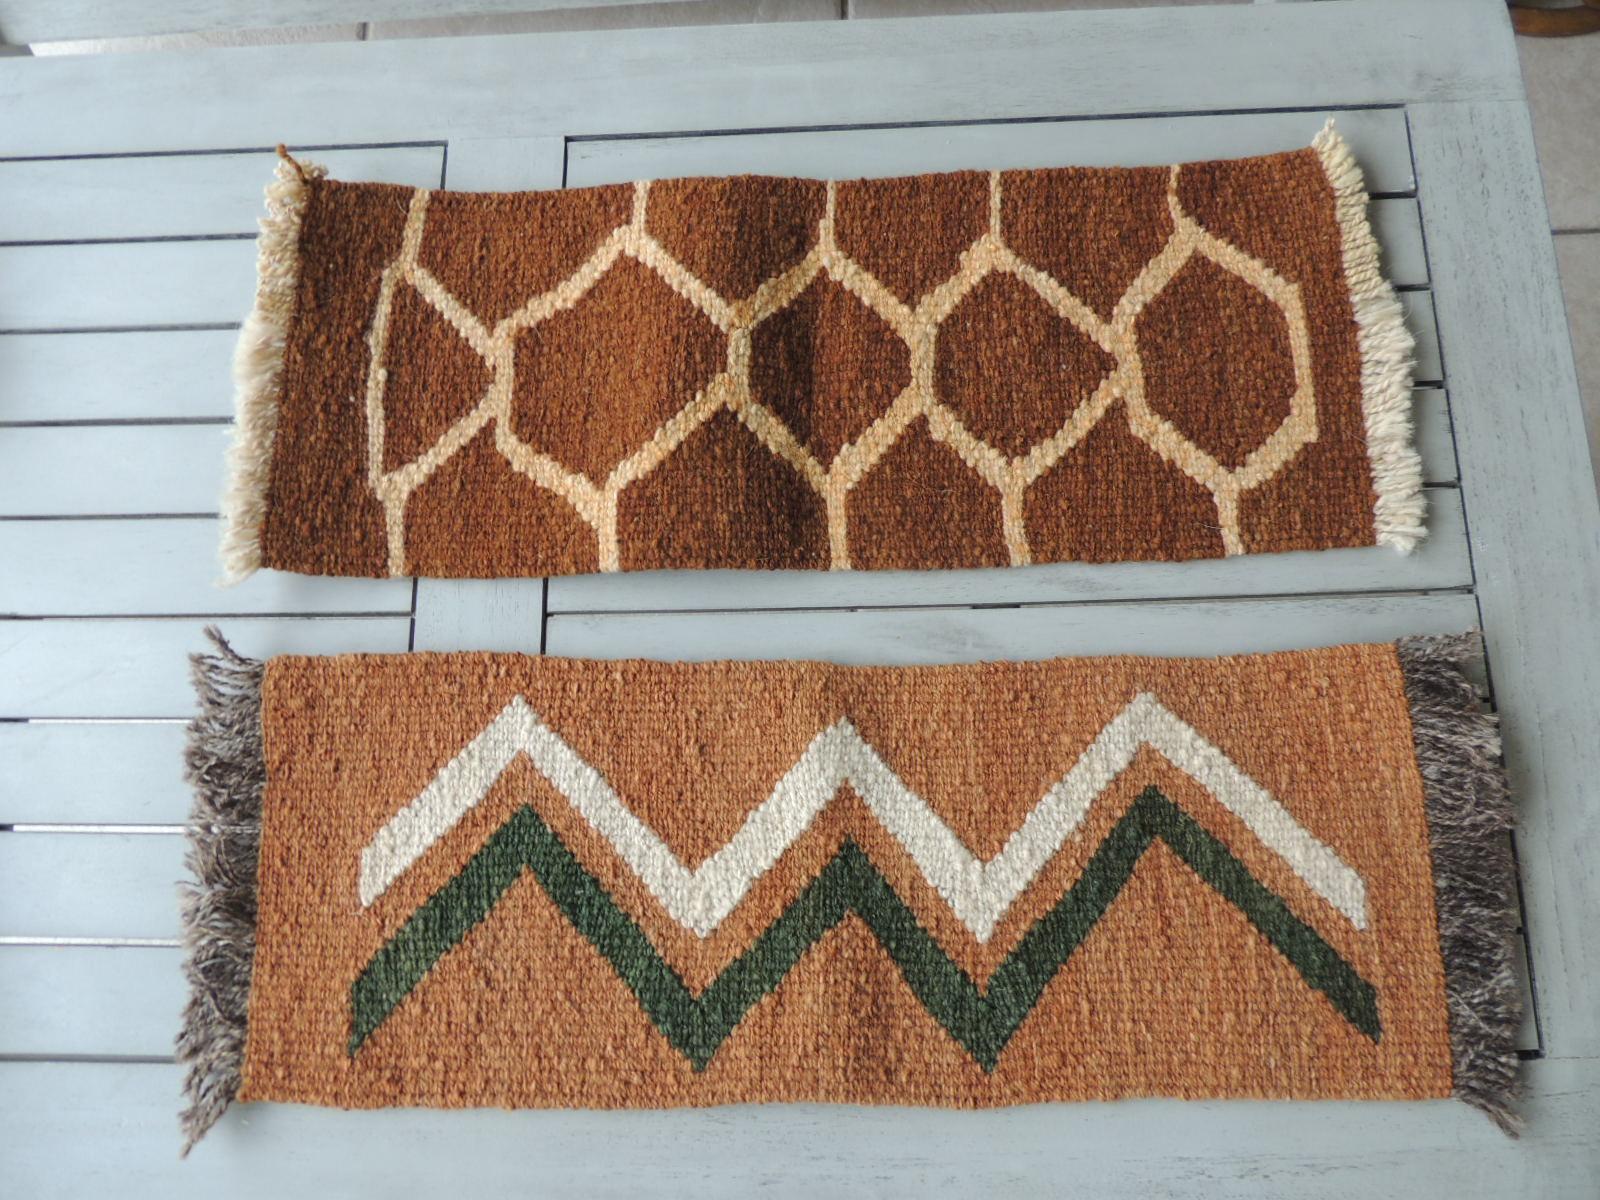 Vintage camel and brown woven rug samples.
Woven abstract pattern and fringes.
Ideal to frame or make them in to pillows.
Sizes:
Top 7.5